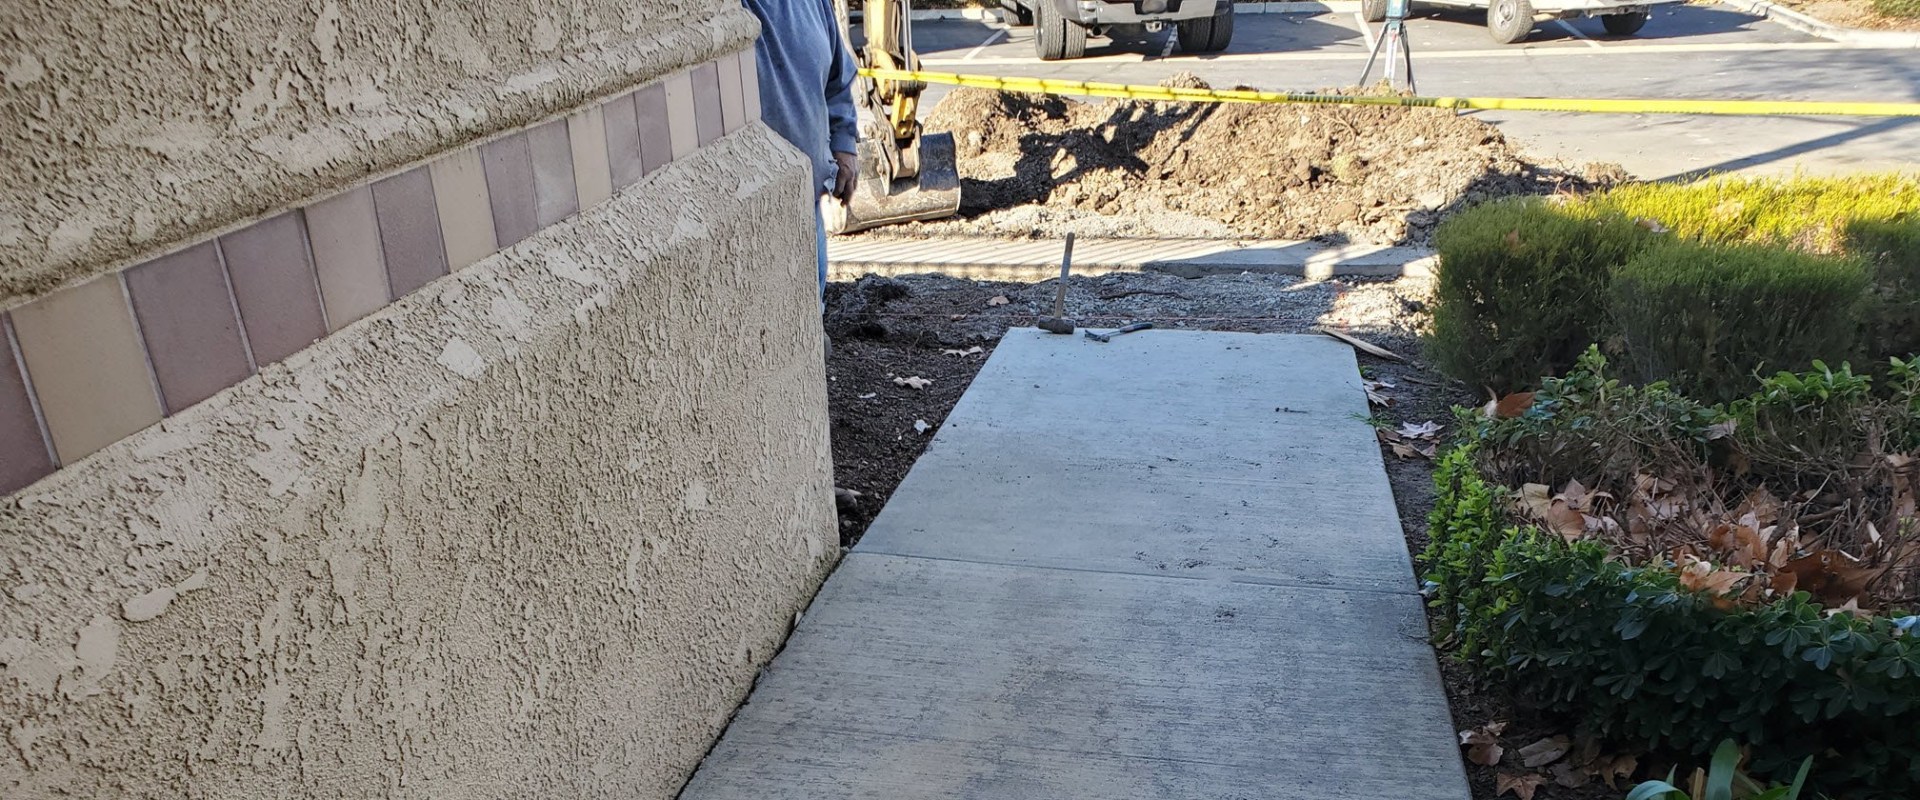 What causes concrete steps to collapse?